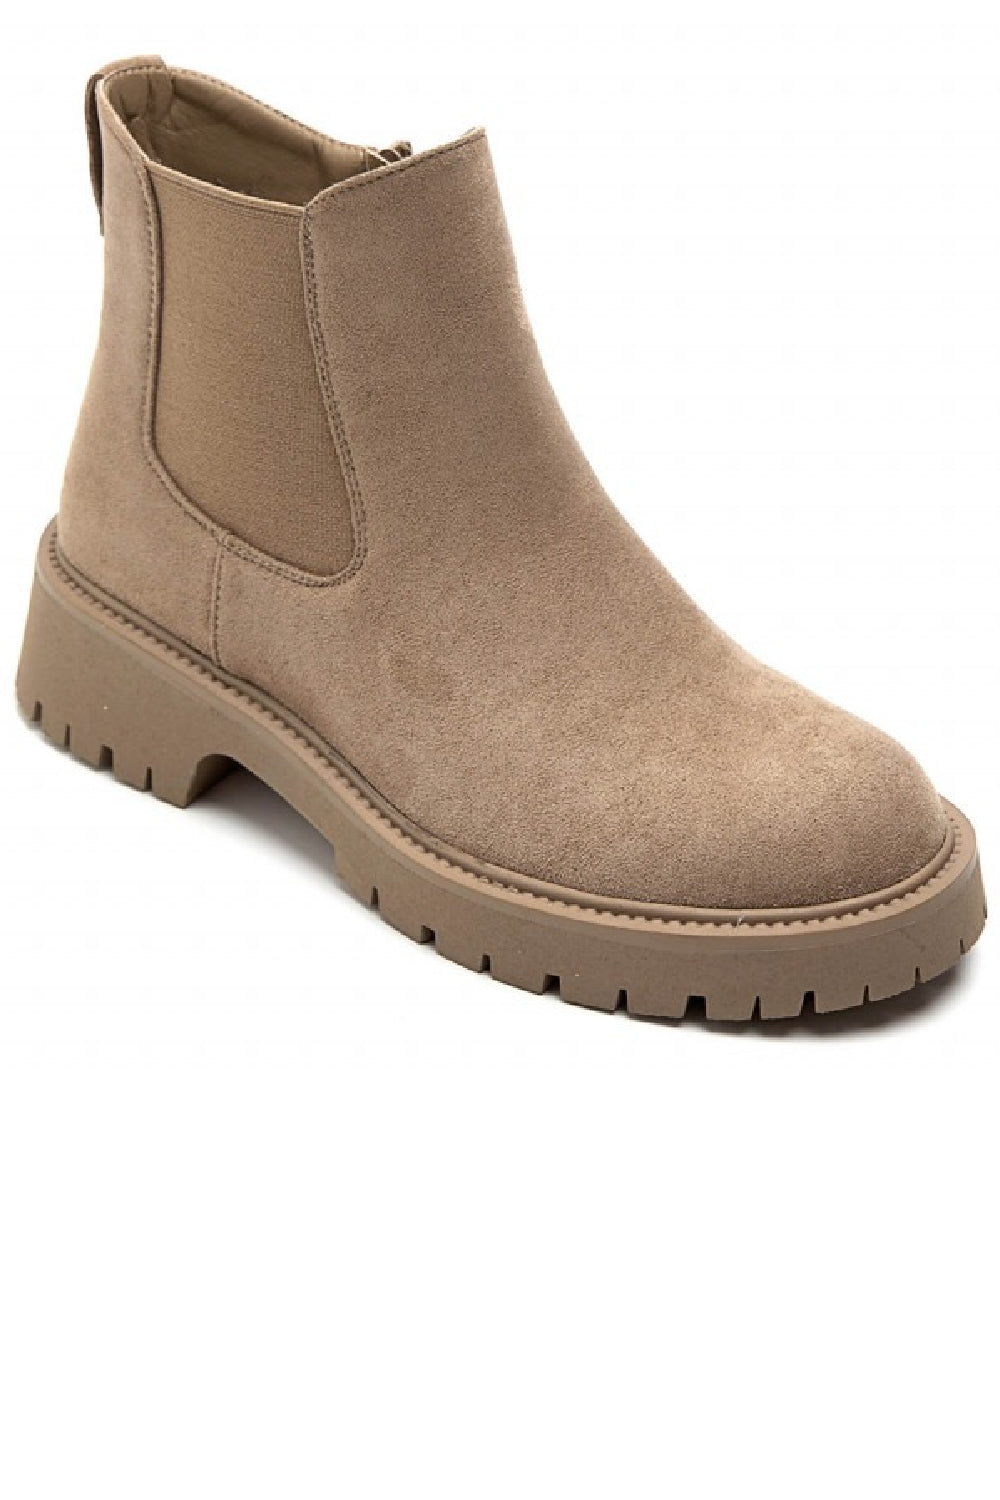 KHAKI SUEDE FLAT CLASSIC ELASTICATED CHELSEA ANKLE BOOTS